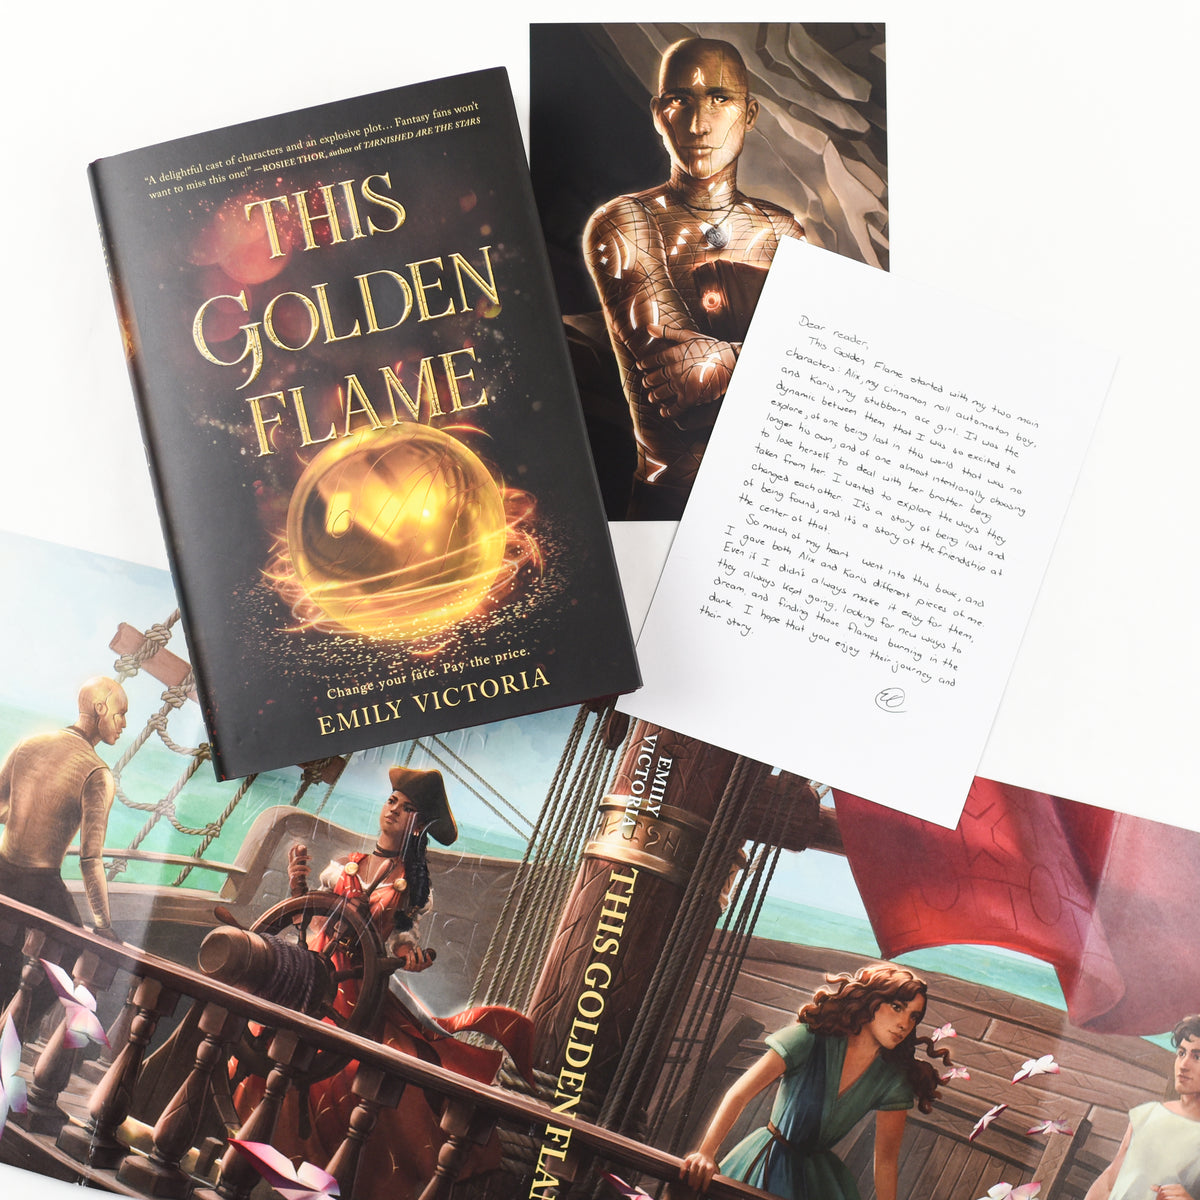 This Golden Flame by Emily Victoria with red stained edges, author signature, fan art on the reversible dust jacket, and author letter.